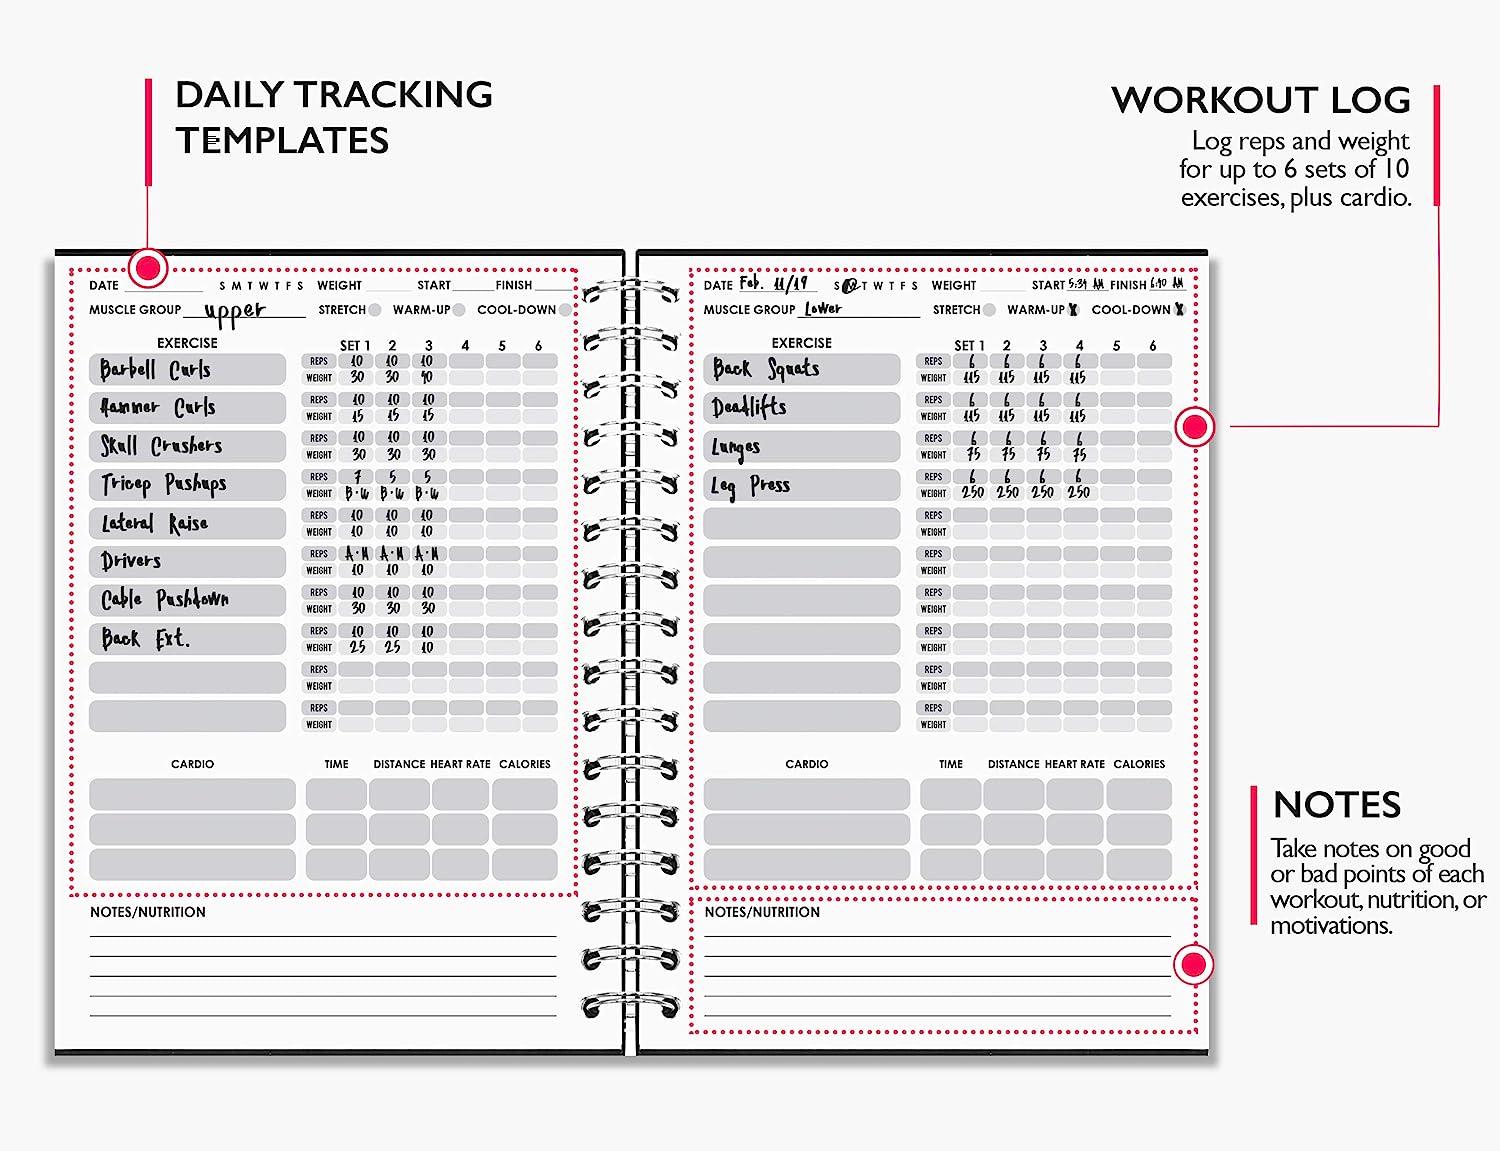 JUBTIC Fitness & Workout Journal for Women and Men, 6 Months Weight Loss  Journal, Fitness Planner to Track Exercise Progress, Workout Log Book 